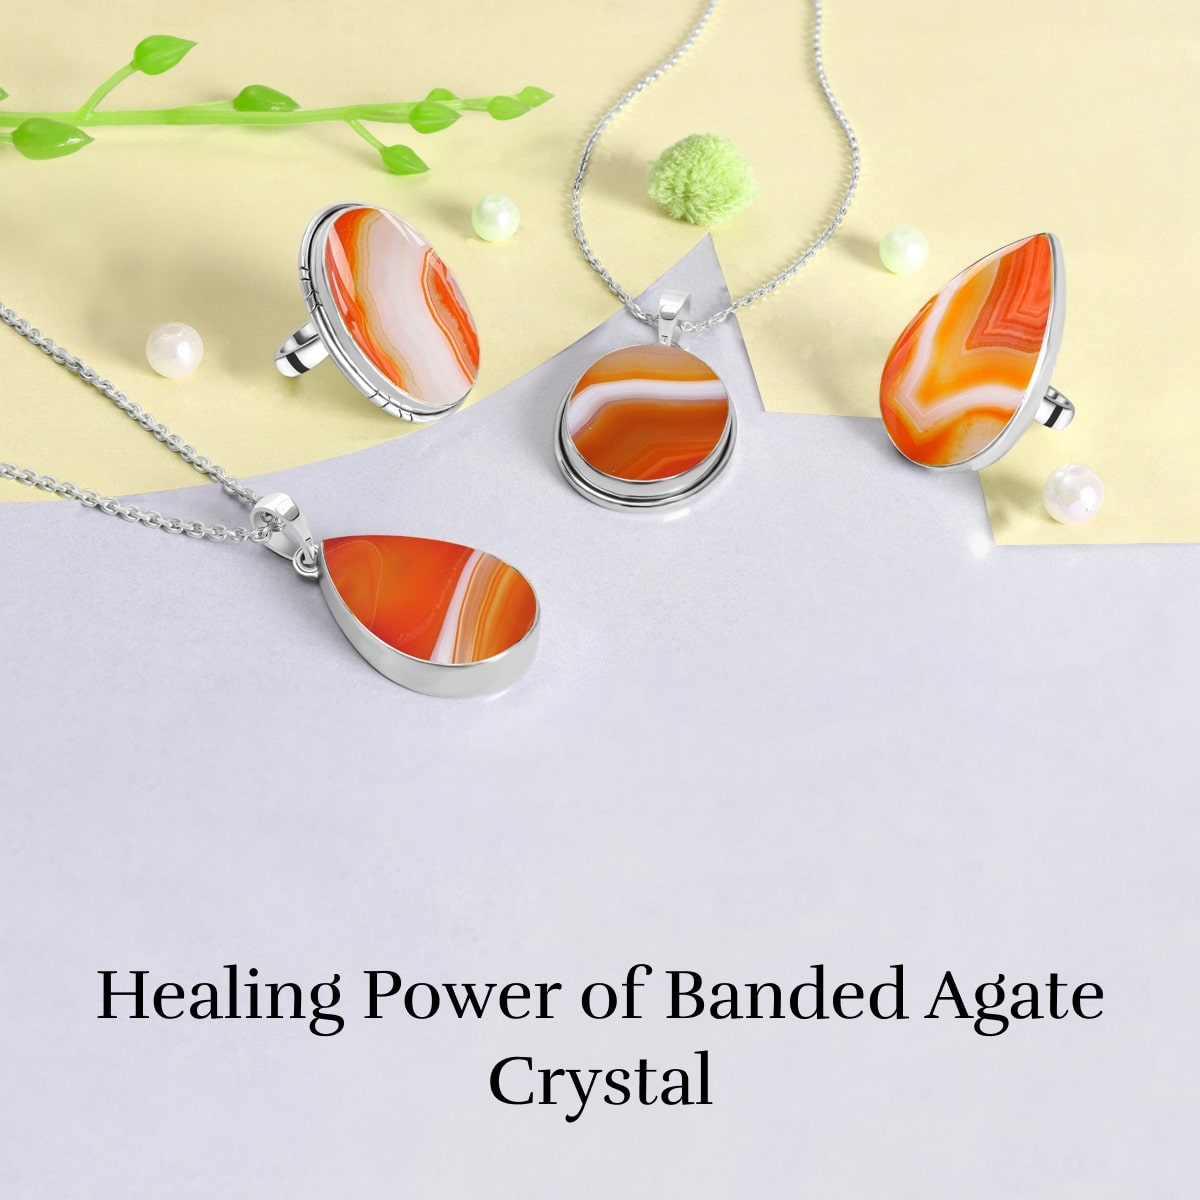 Benefits of Banded Agate Crystal